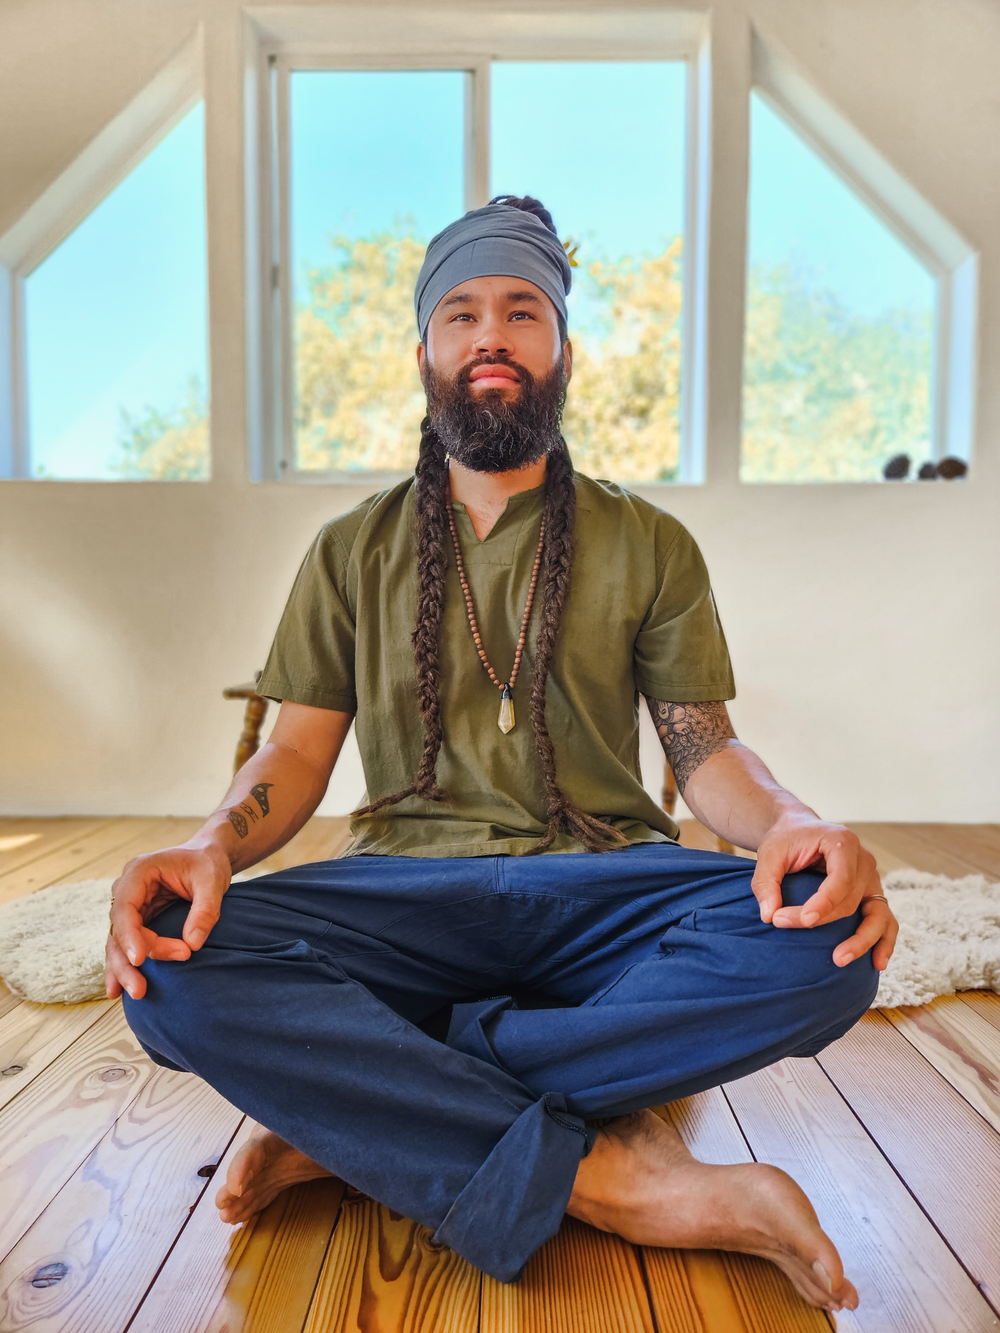 Male model wears long scarf as a head cover. He sits in meditation pose wearing green shirt and blue jogger pants.